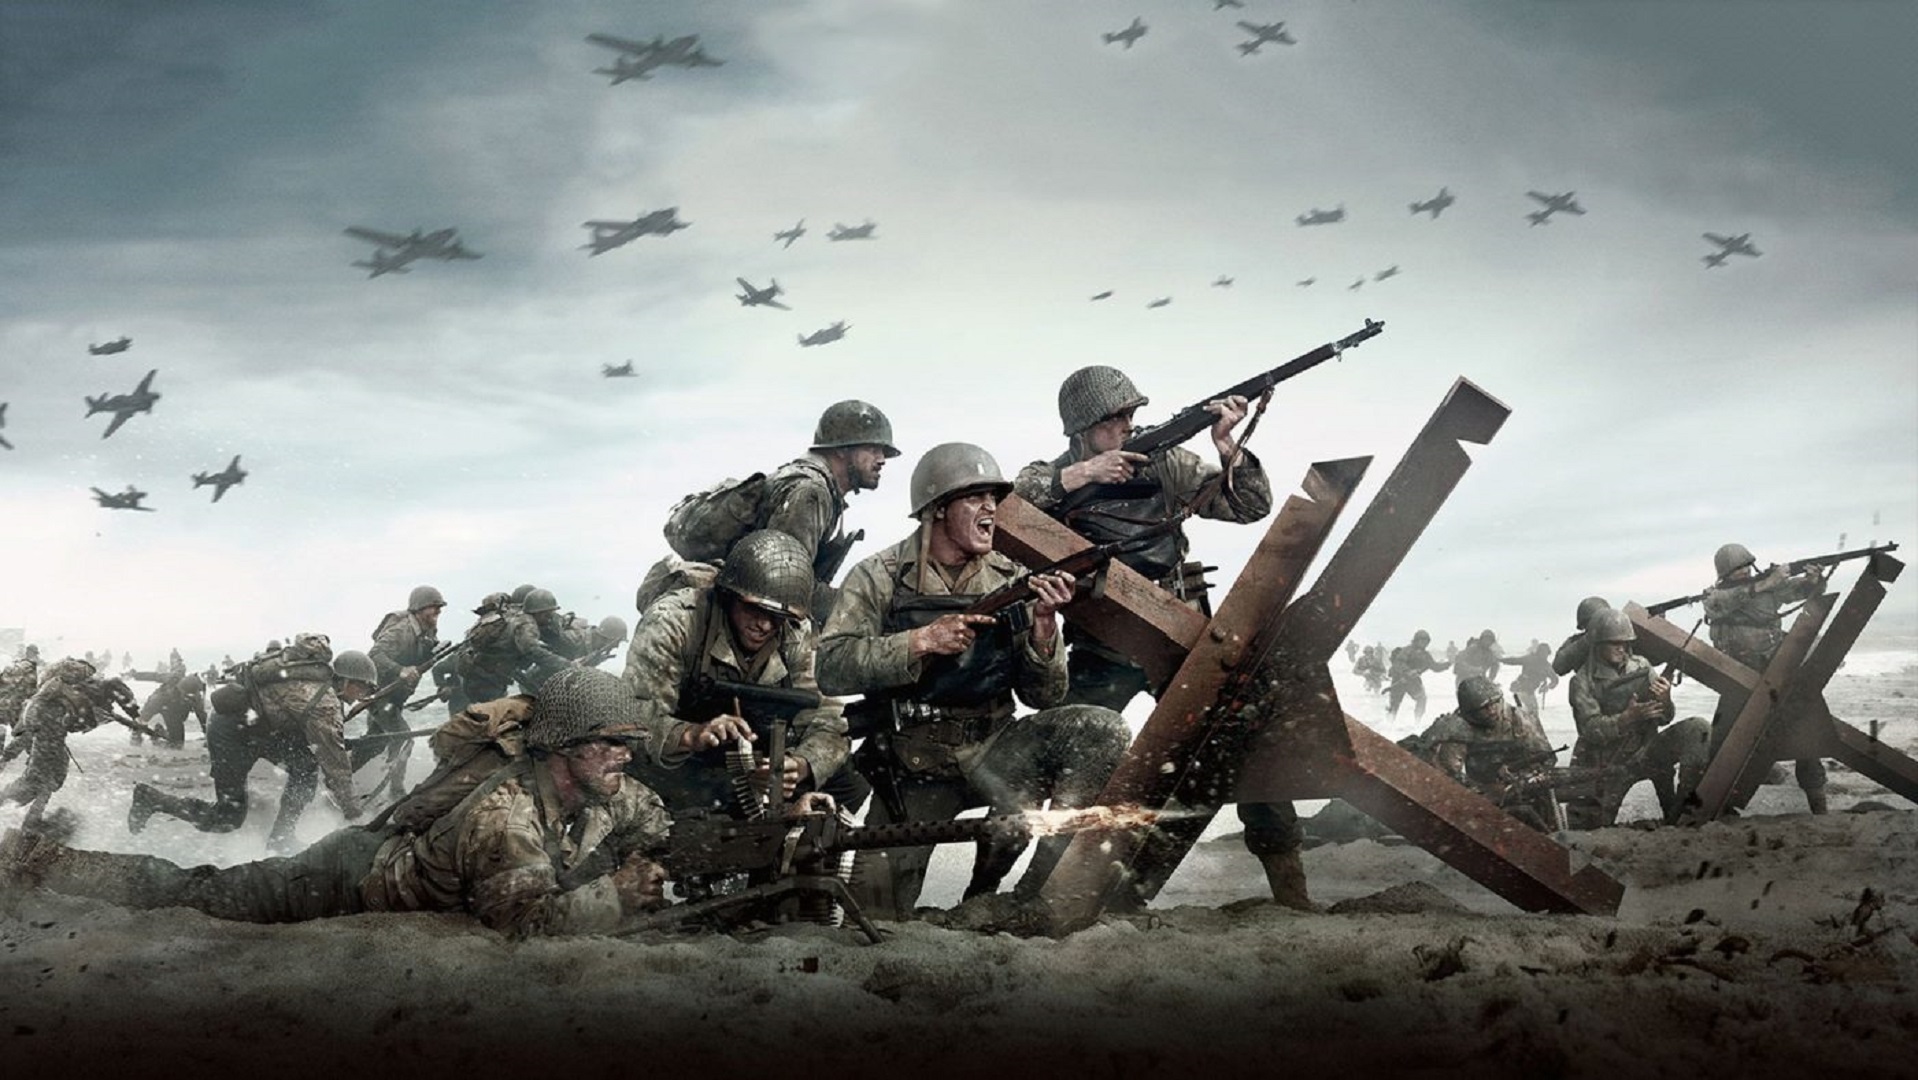 Call of Duty Vanguard heads back to WWII, comes out Nov. 5 - CNET